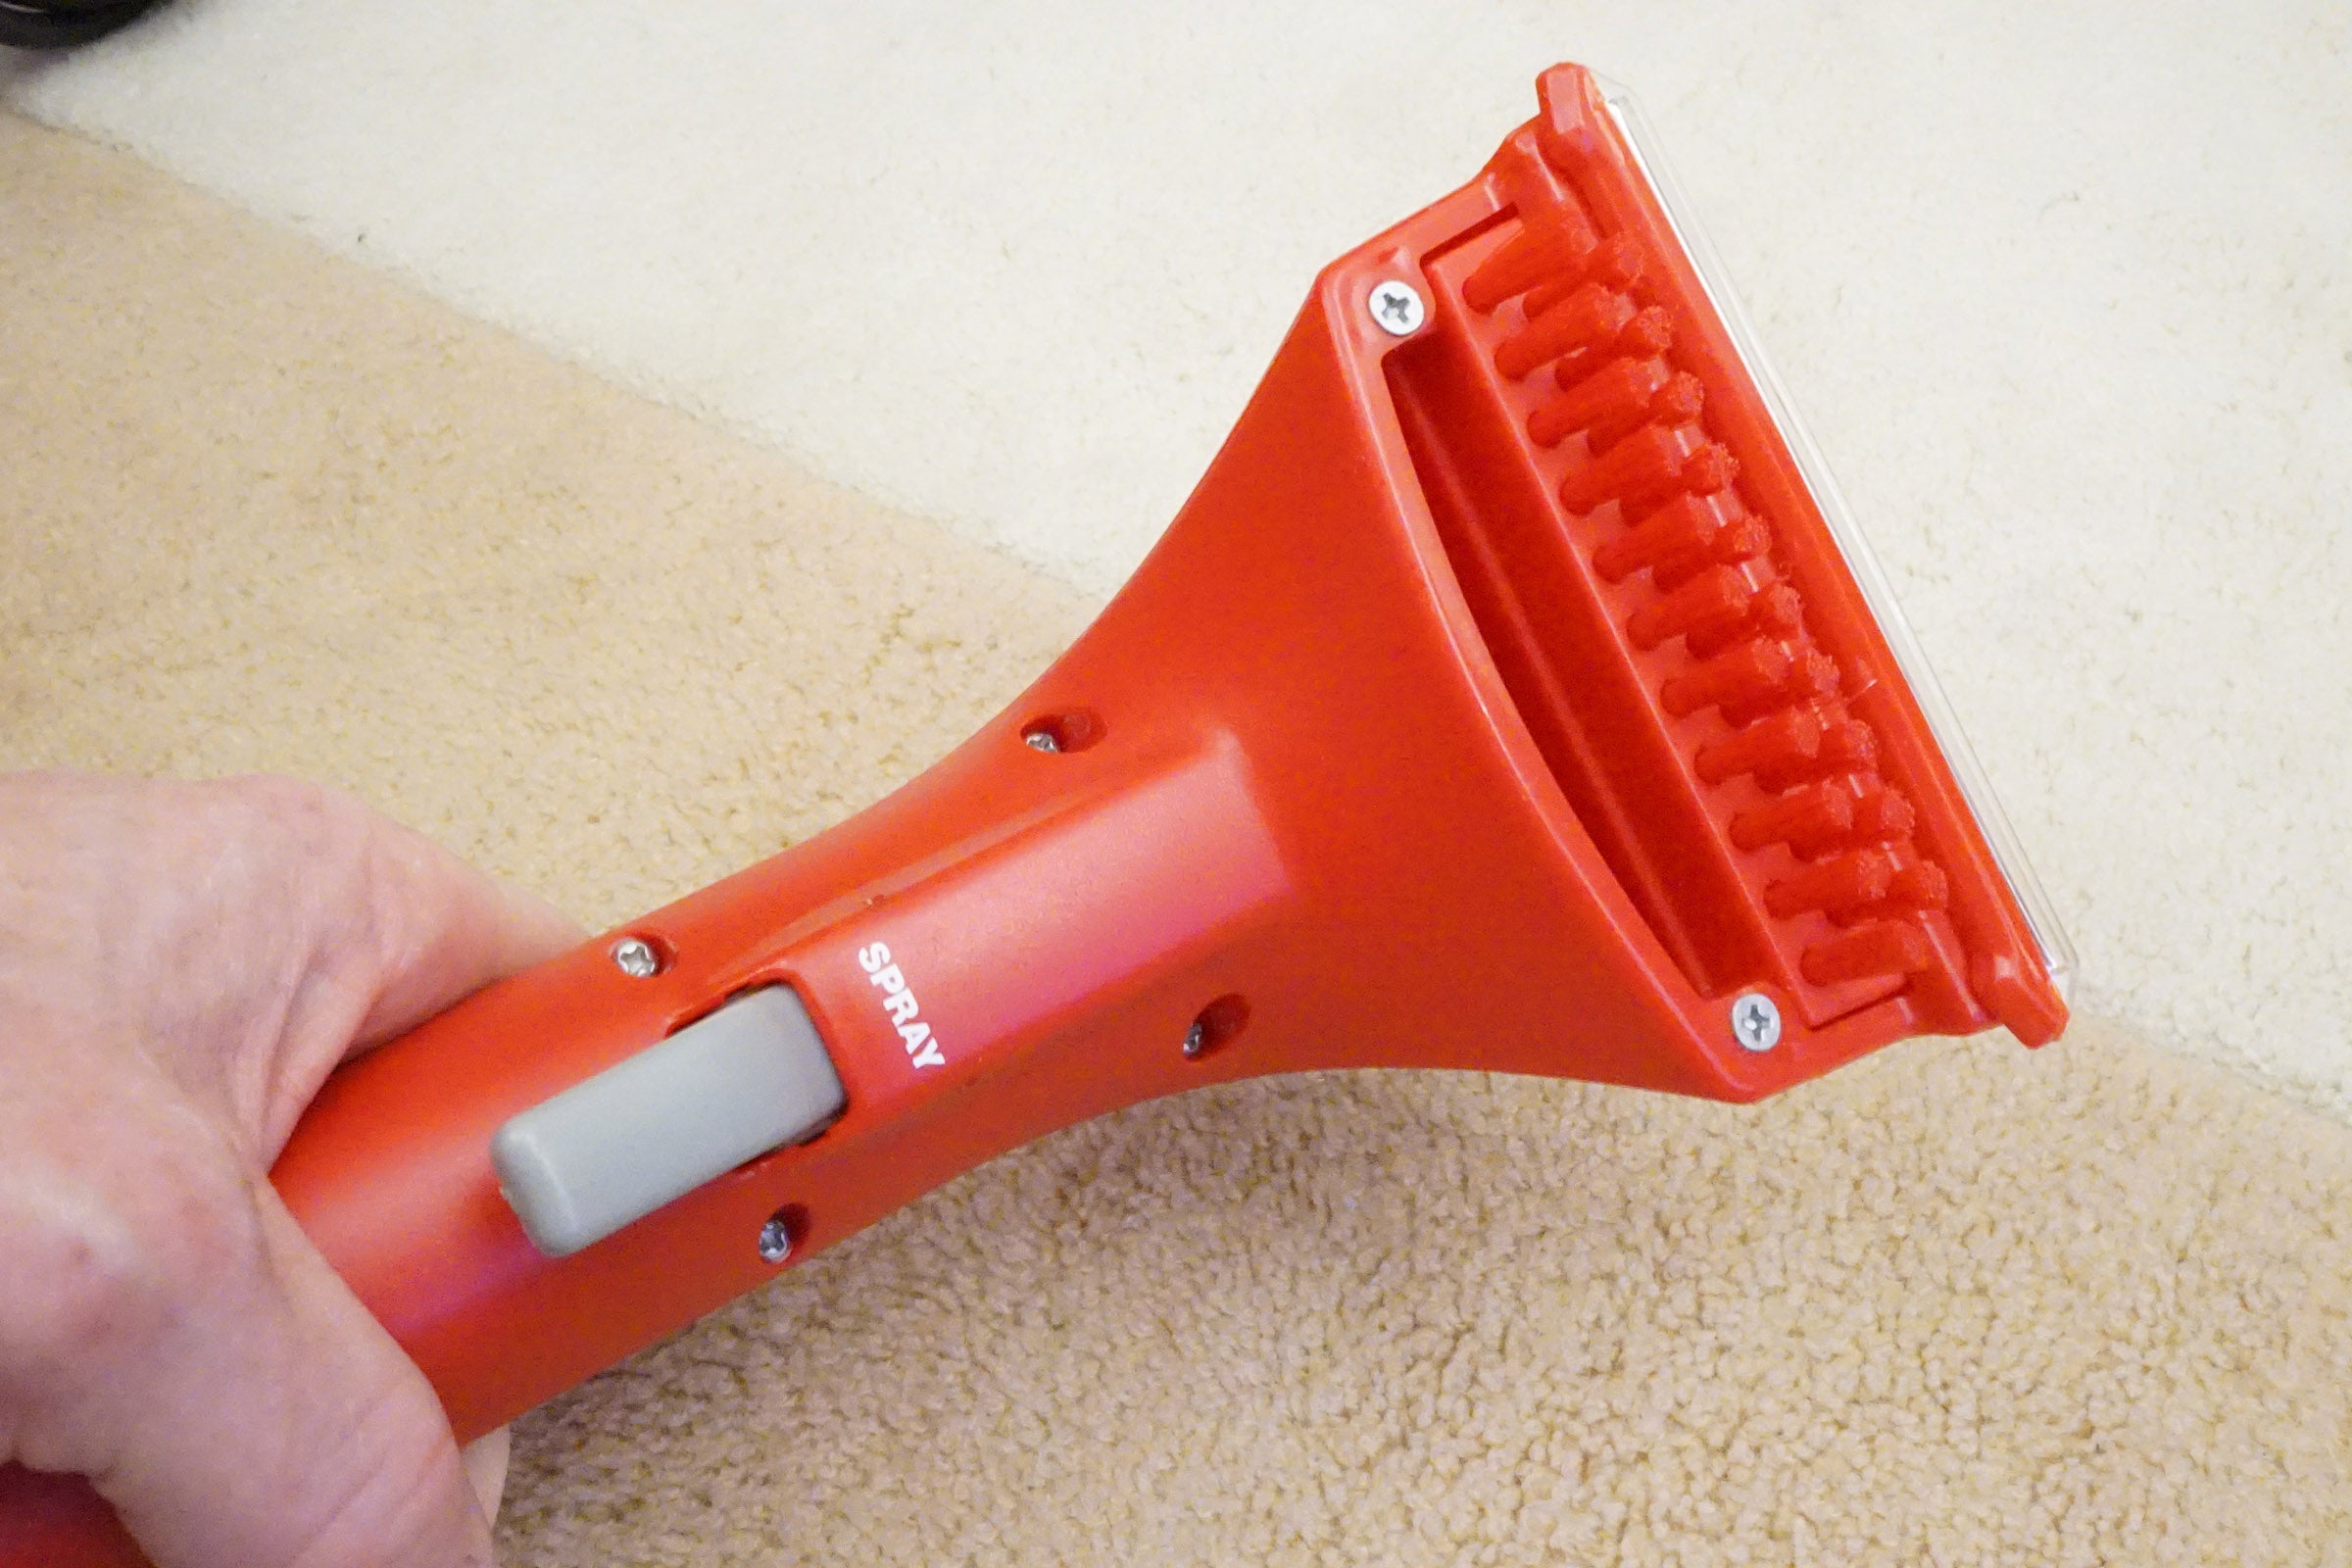 Rug Doctor carpet cleaner handheld brush attachment in use.